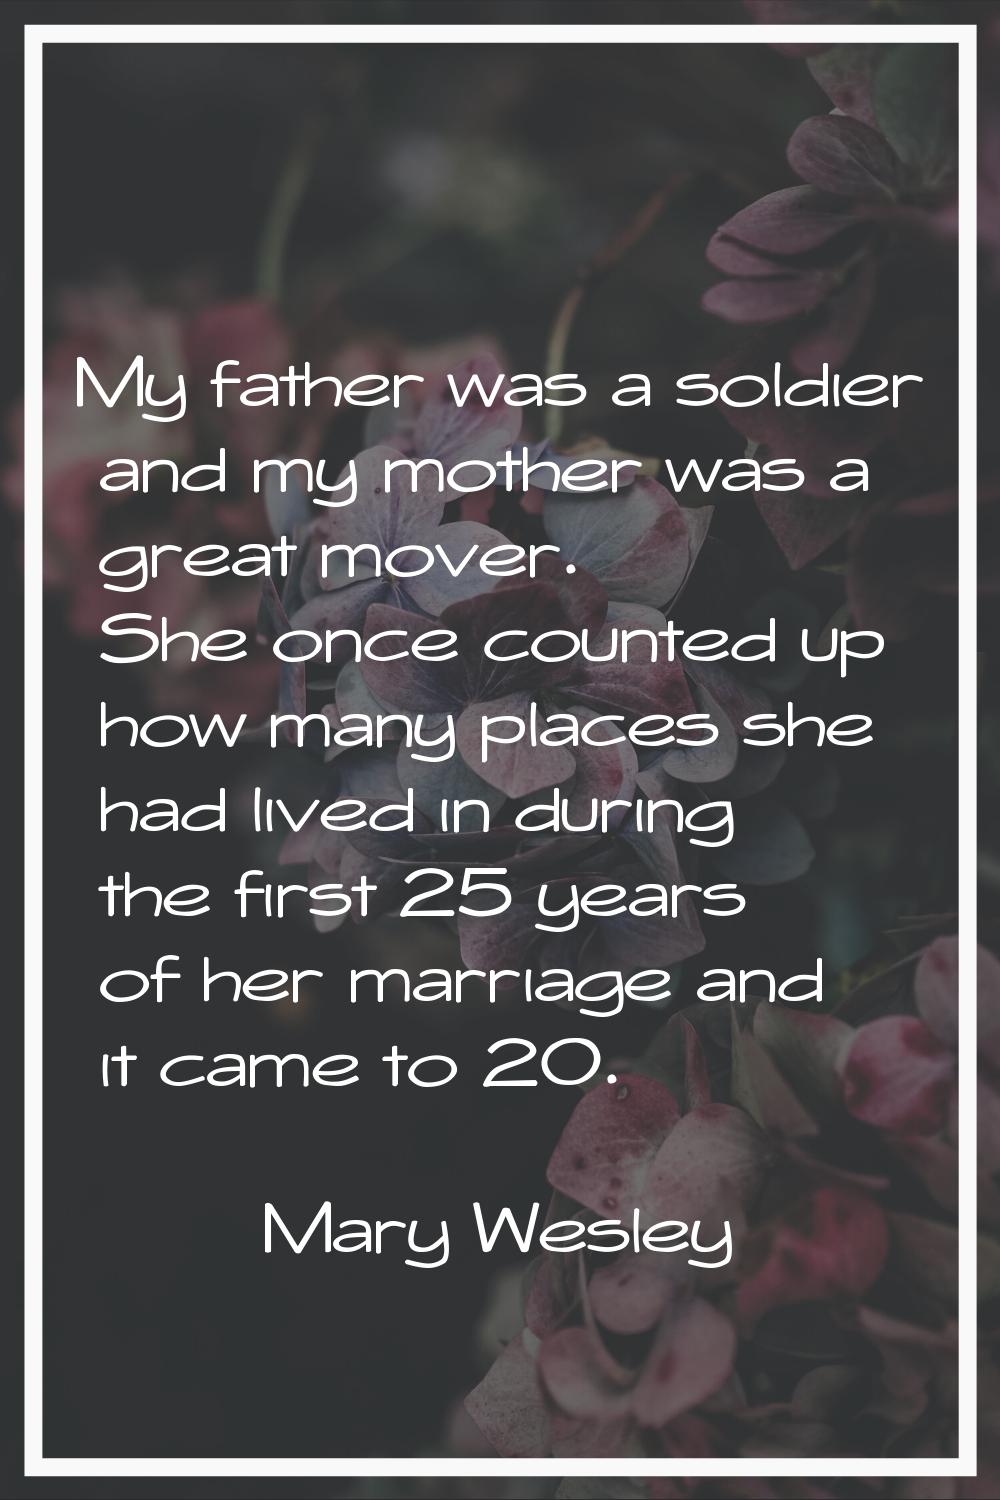 My father was a soldier and my mother was a great mover. She once counted up how many places she ha